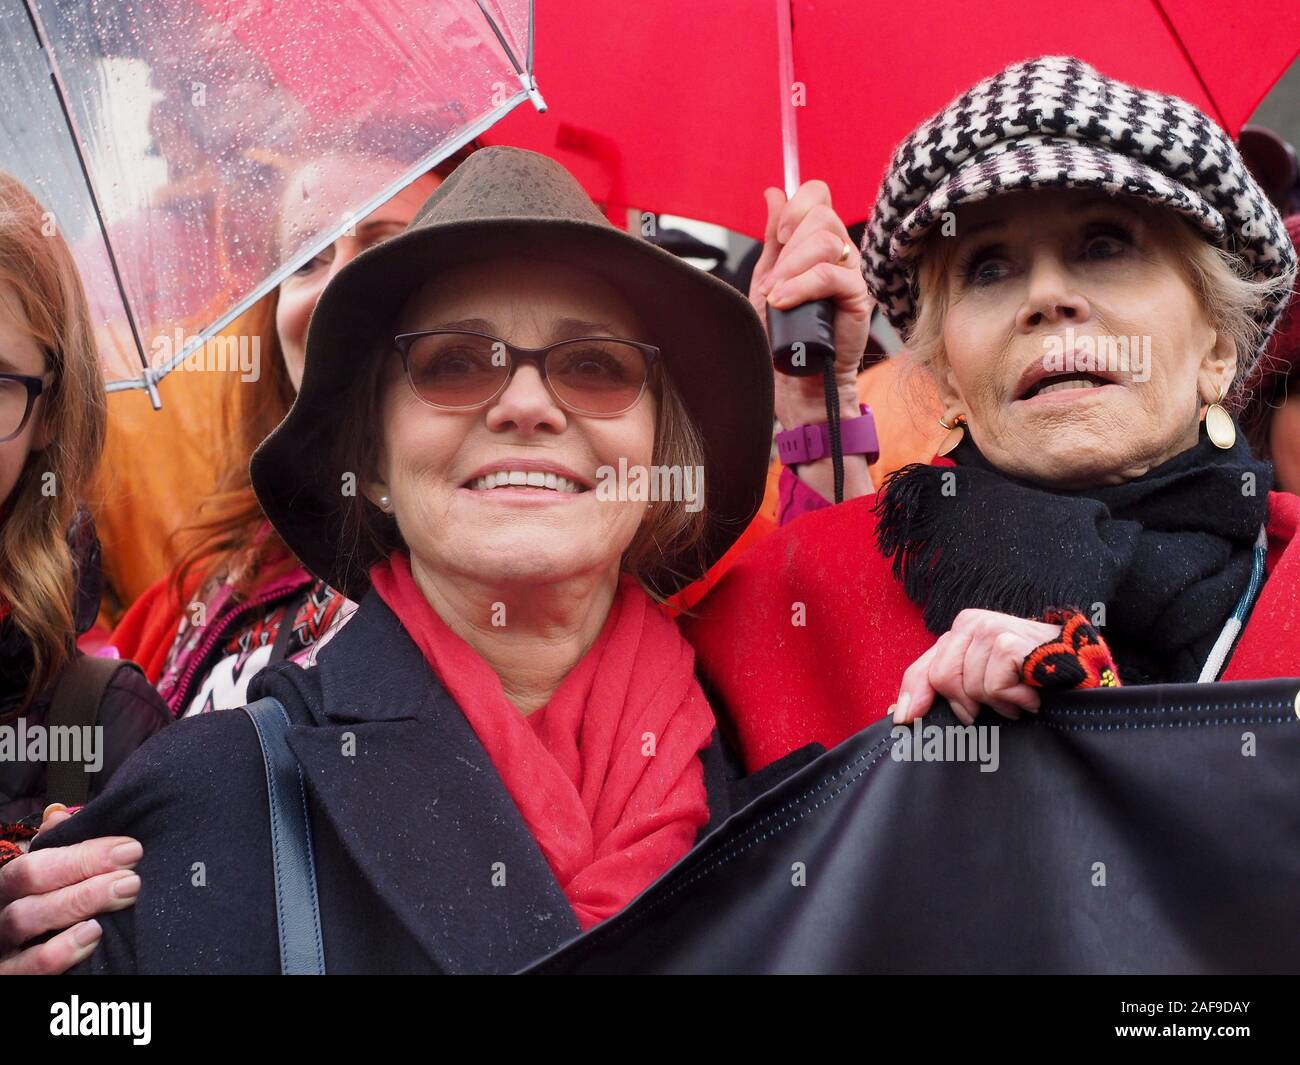 Washington, District of Columbia, USA. 13th Dec, 2019. SALLY FIELD, left, and JANE FONDA stand on the steps of the US Capitol during the Fire Drill Friday rally, with the demand for a Green New Deal. Sally Field was arrested at Fonda's Fire Drill Fridays climate change march in Washington. Credit: Sue Dorfman/ZUMA Wire/Alamy Live News Stock Photo